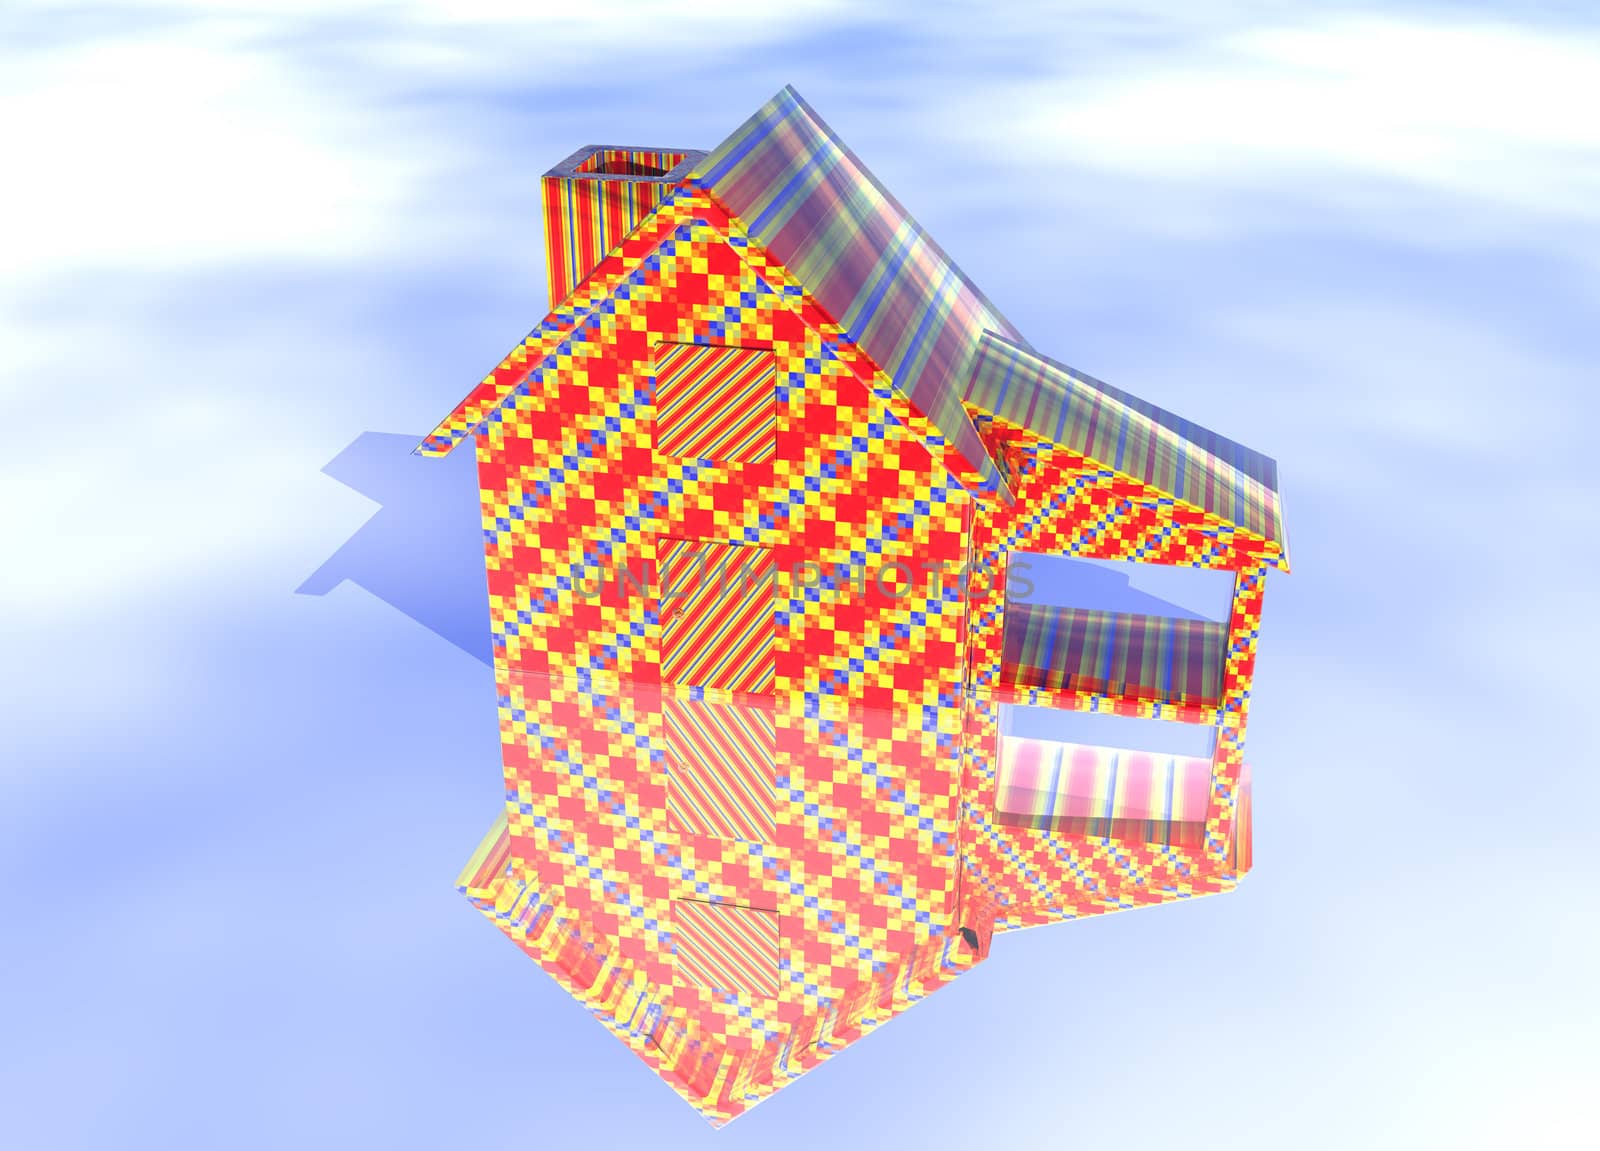 Abstract Christmas Gift Wrapped House Model on Blue-Sky Background with Reflection